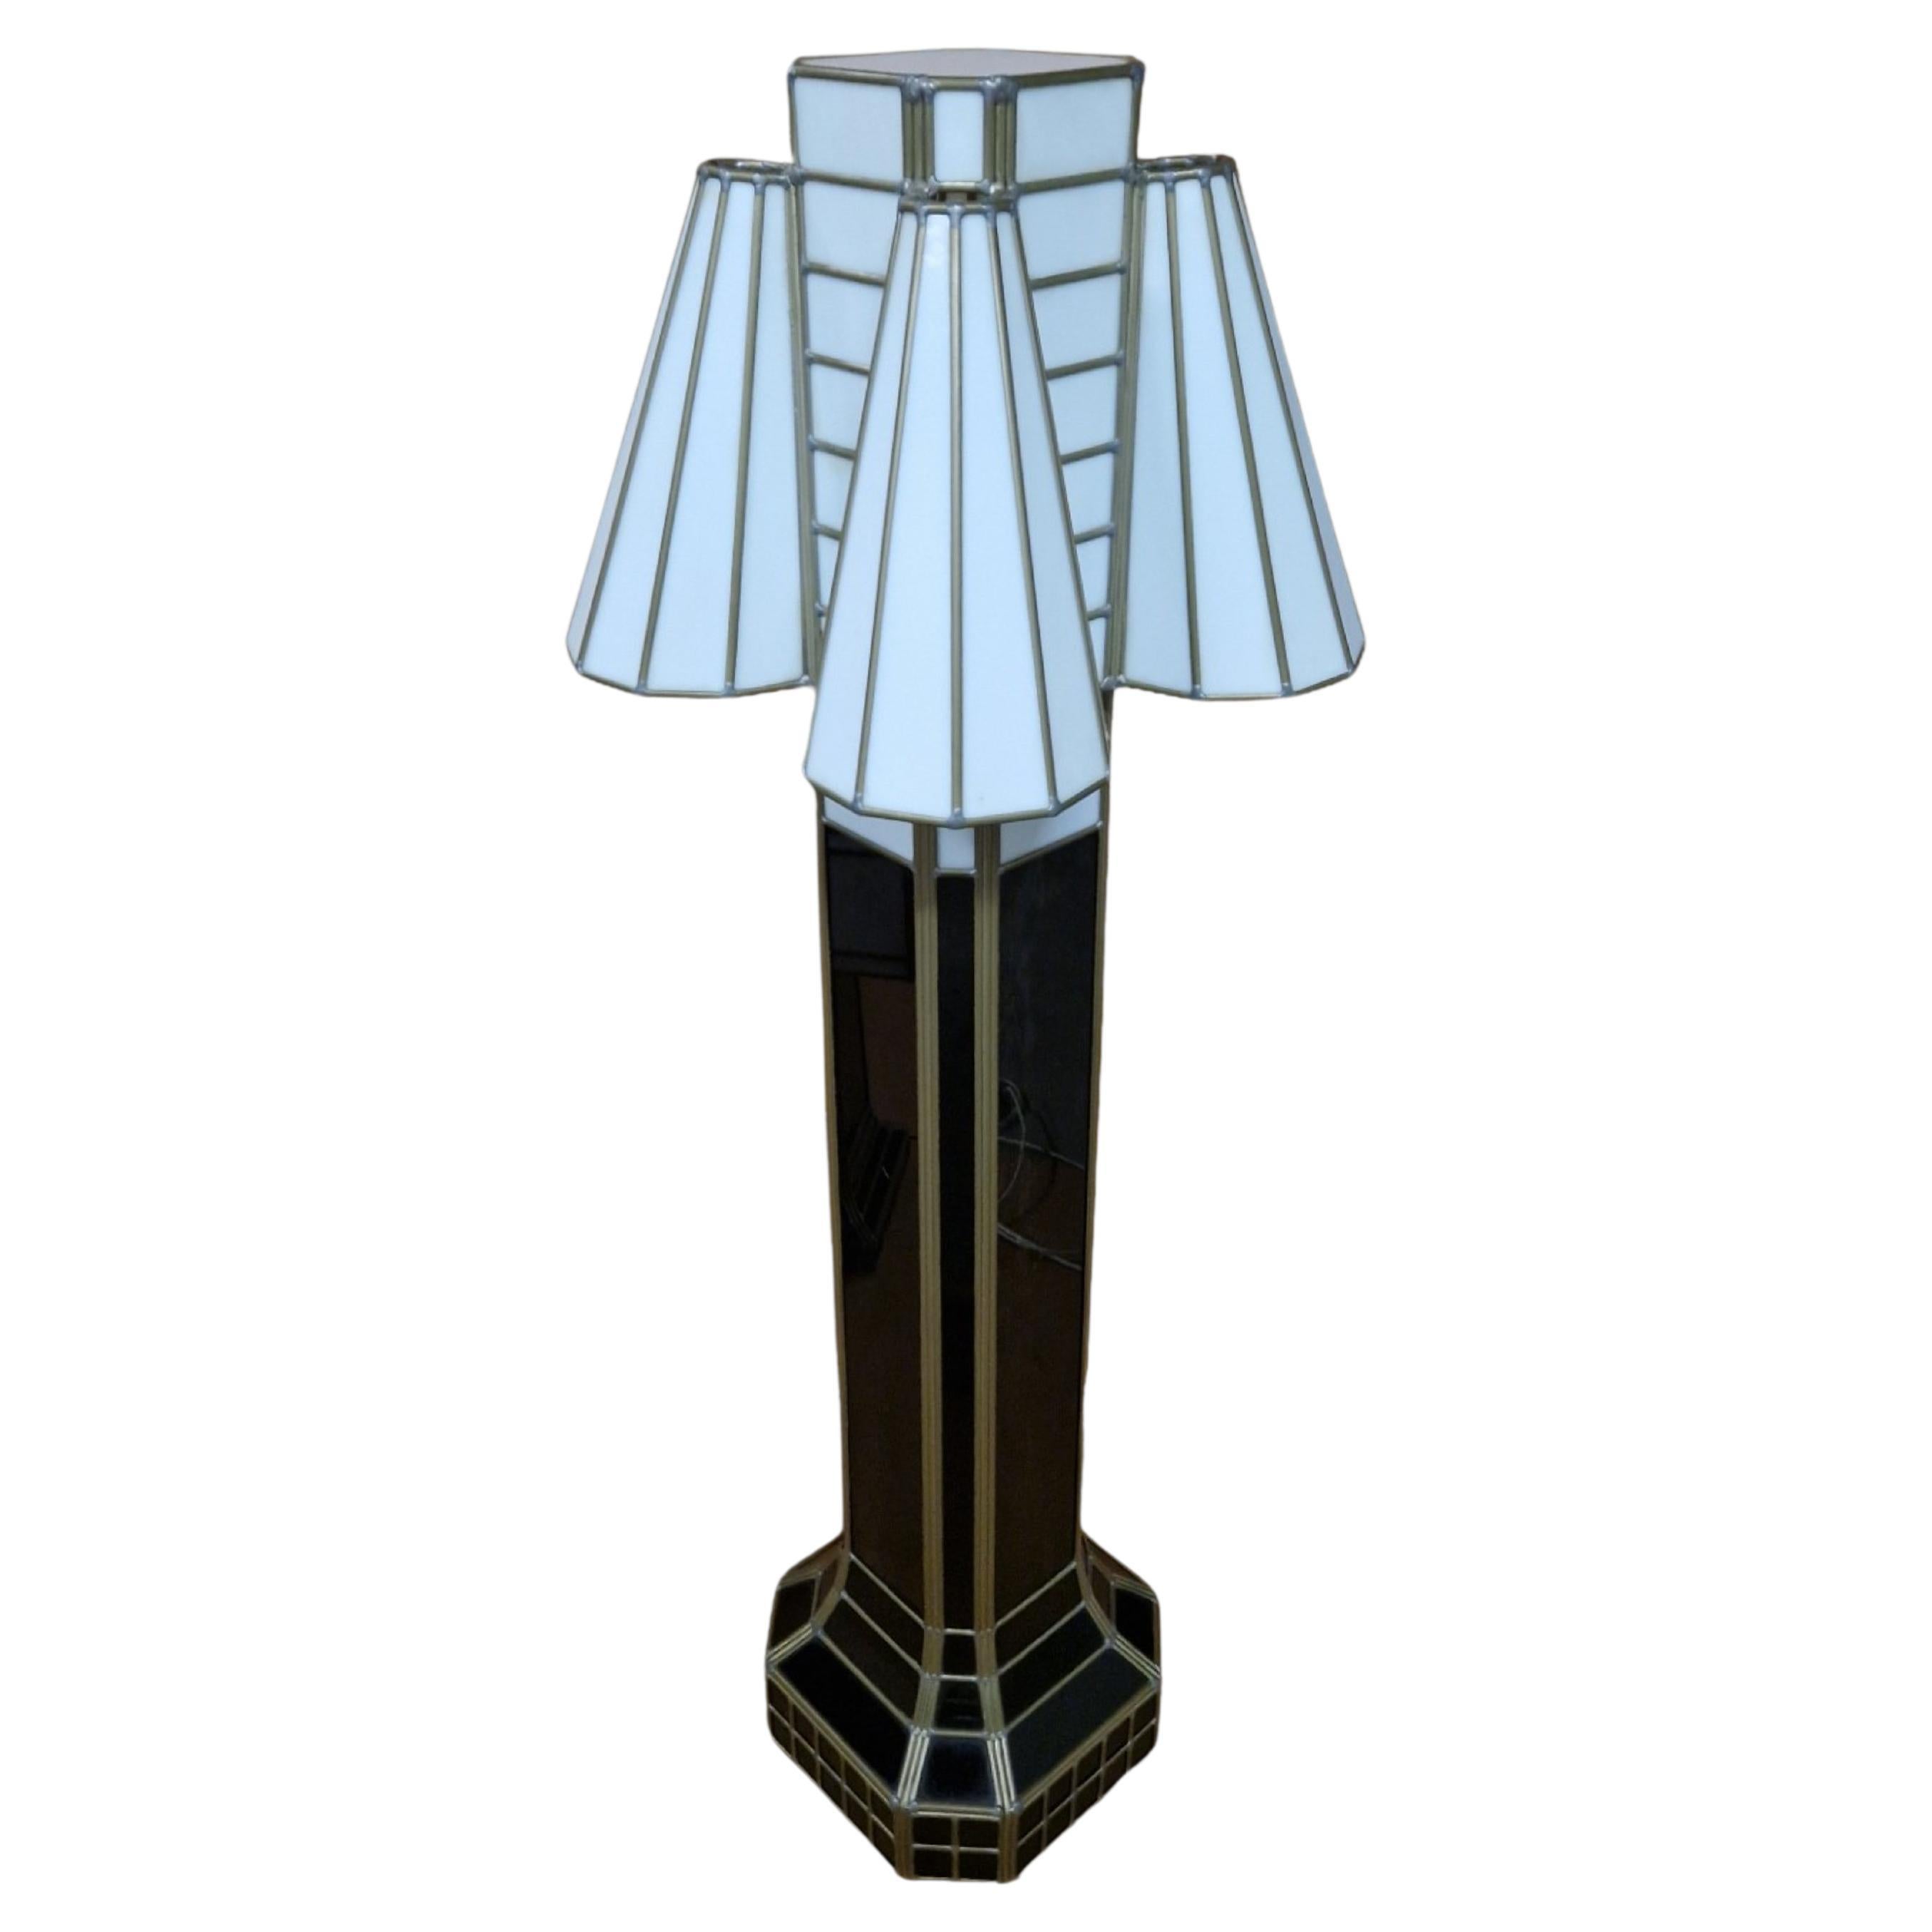 Impressive art deco stained glass floor lamp, Germany 1960s